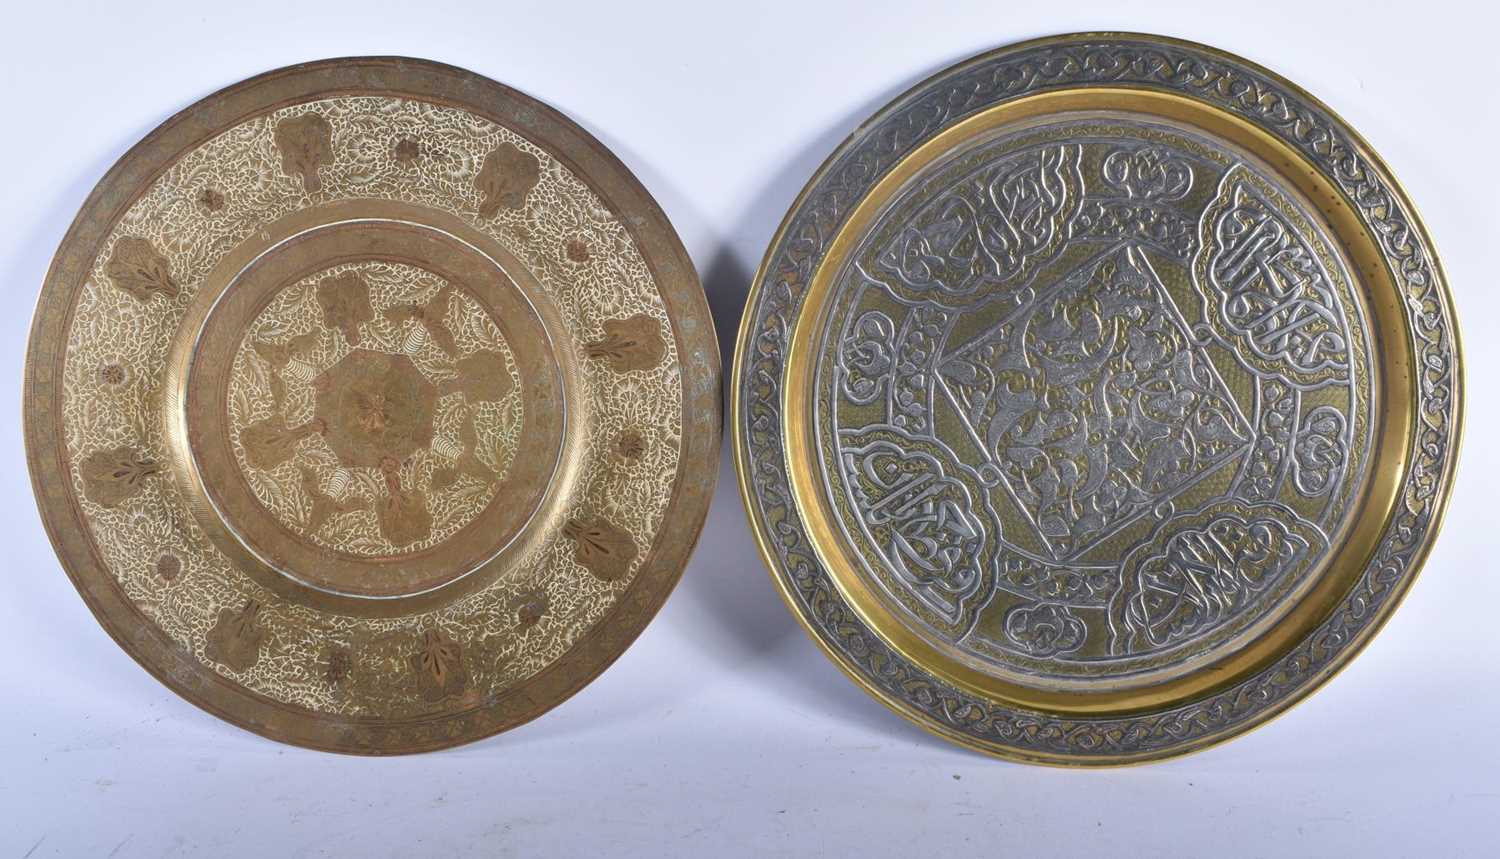 A COLLECTION OF ANTIQUE MIDDLE EASTERN BRONZE & METALWORK including a silver inlaid charger etc. - Image 6 of 8